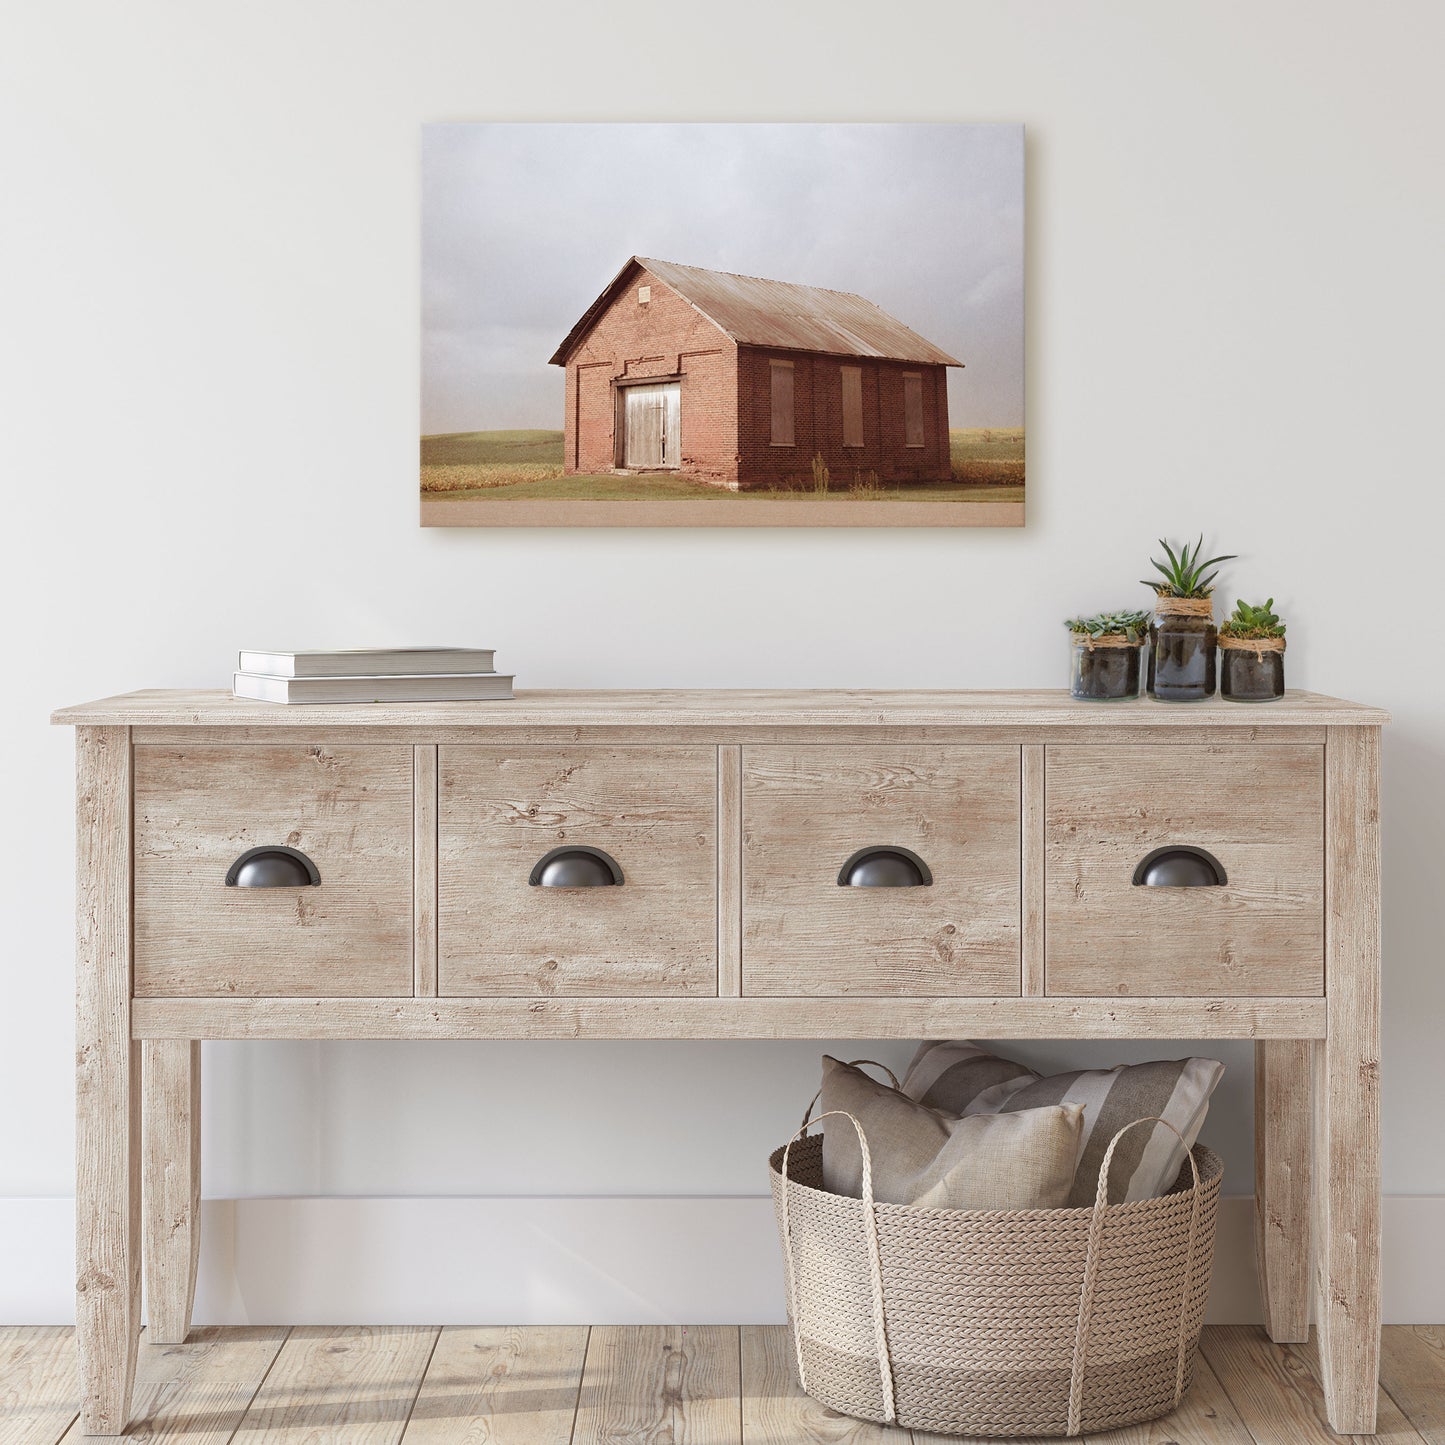 photography canvas of a one room schoolhouse